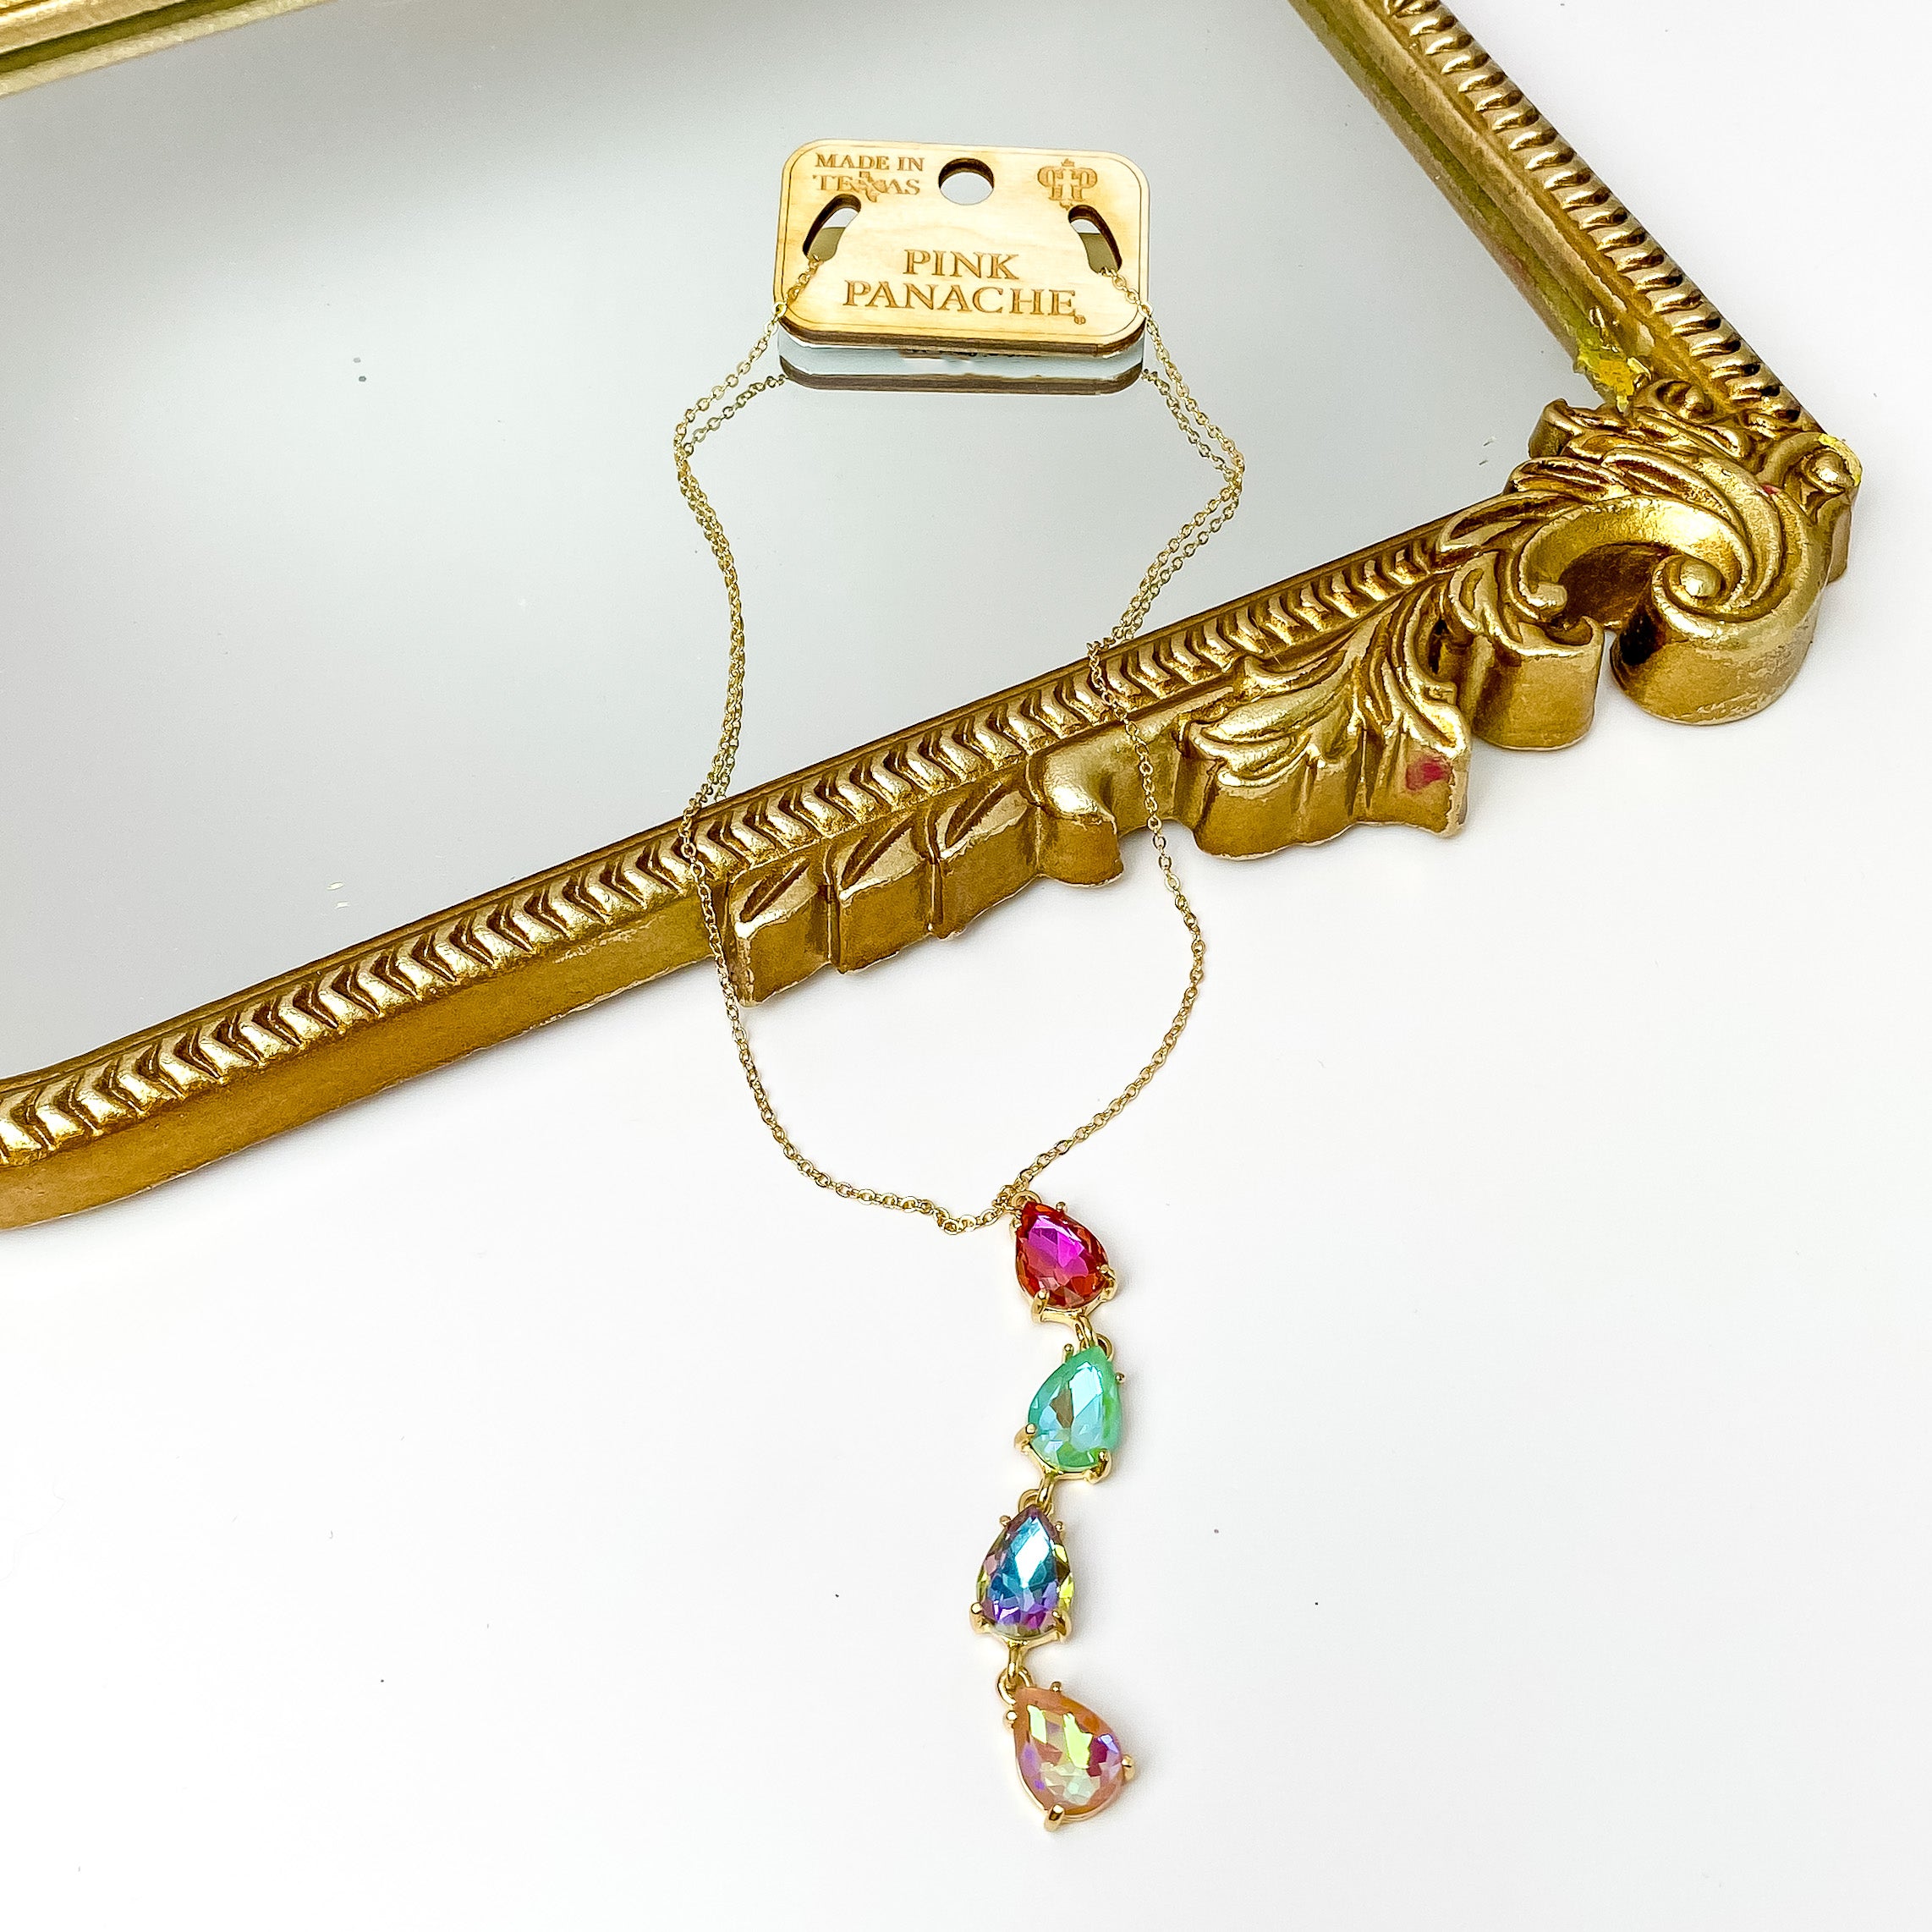 Pink Panache | Gold Tone Chain Necklace with Four Crystal Teardrop Pendant in Multicolor - Giddy Up Glamour Boutique